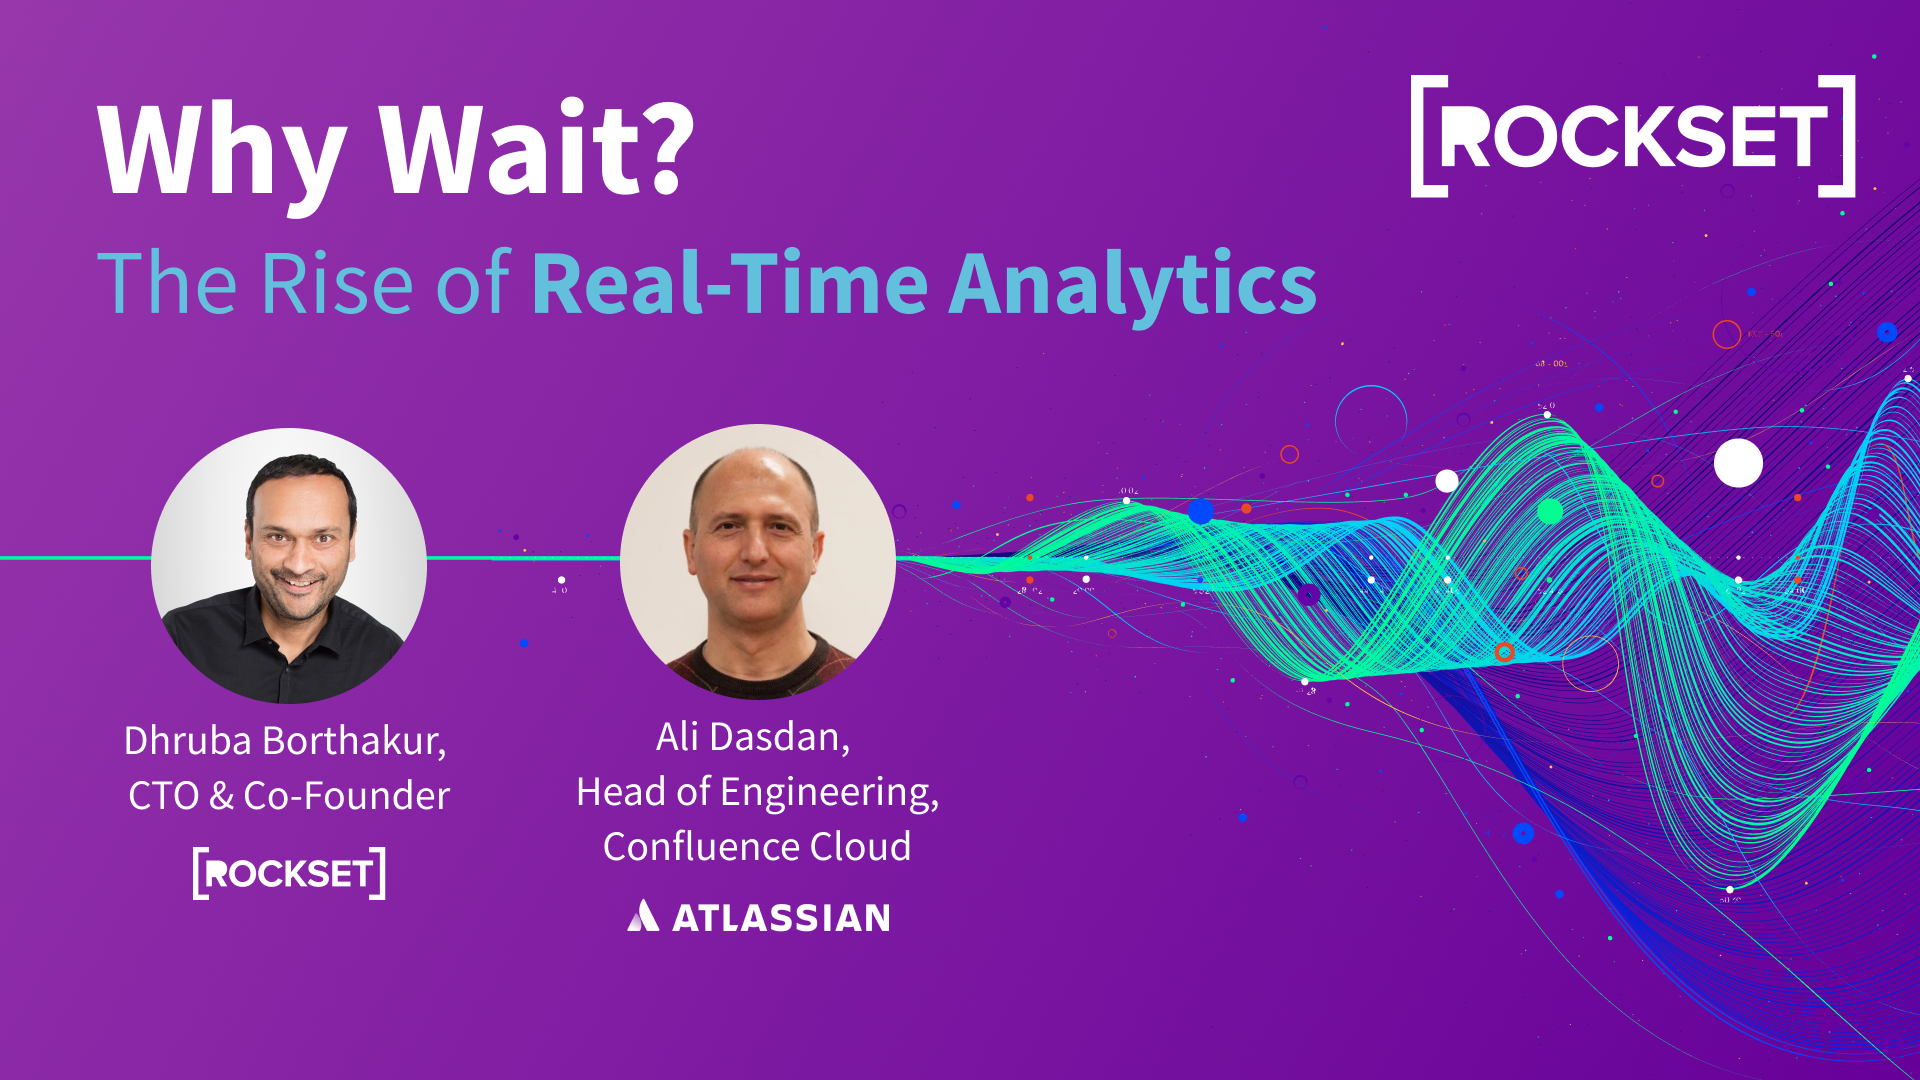 Rockset Podcast Episode 3: Why Wait? The Rise of Real-Time Analytics